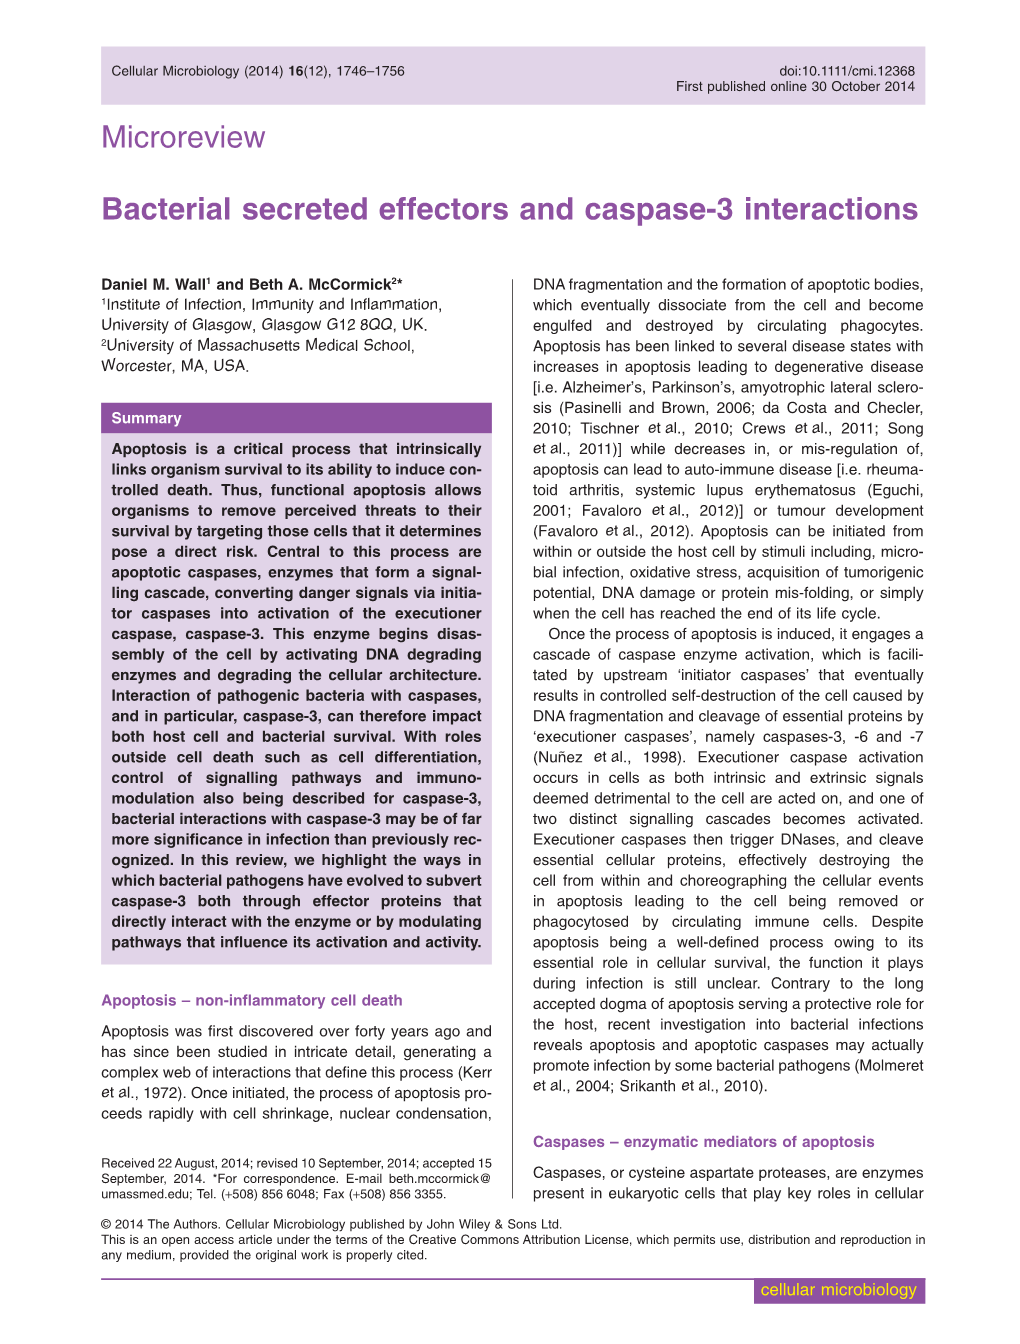 Bacterial Secreted Effectors and Caspase3 Interactions